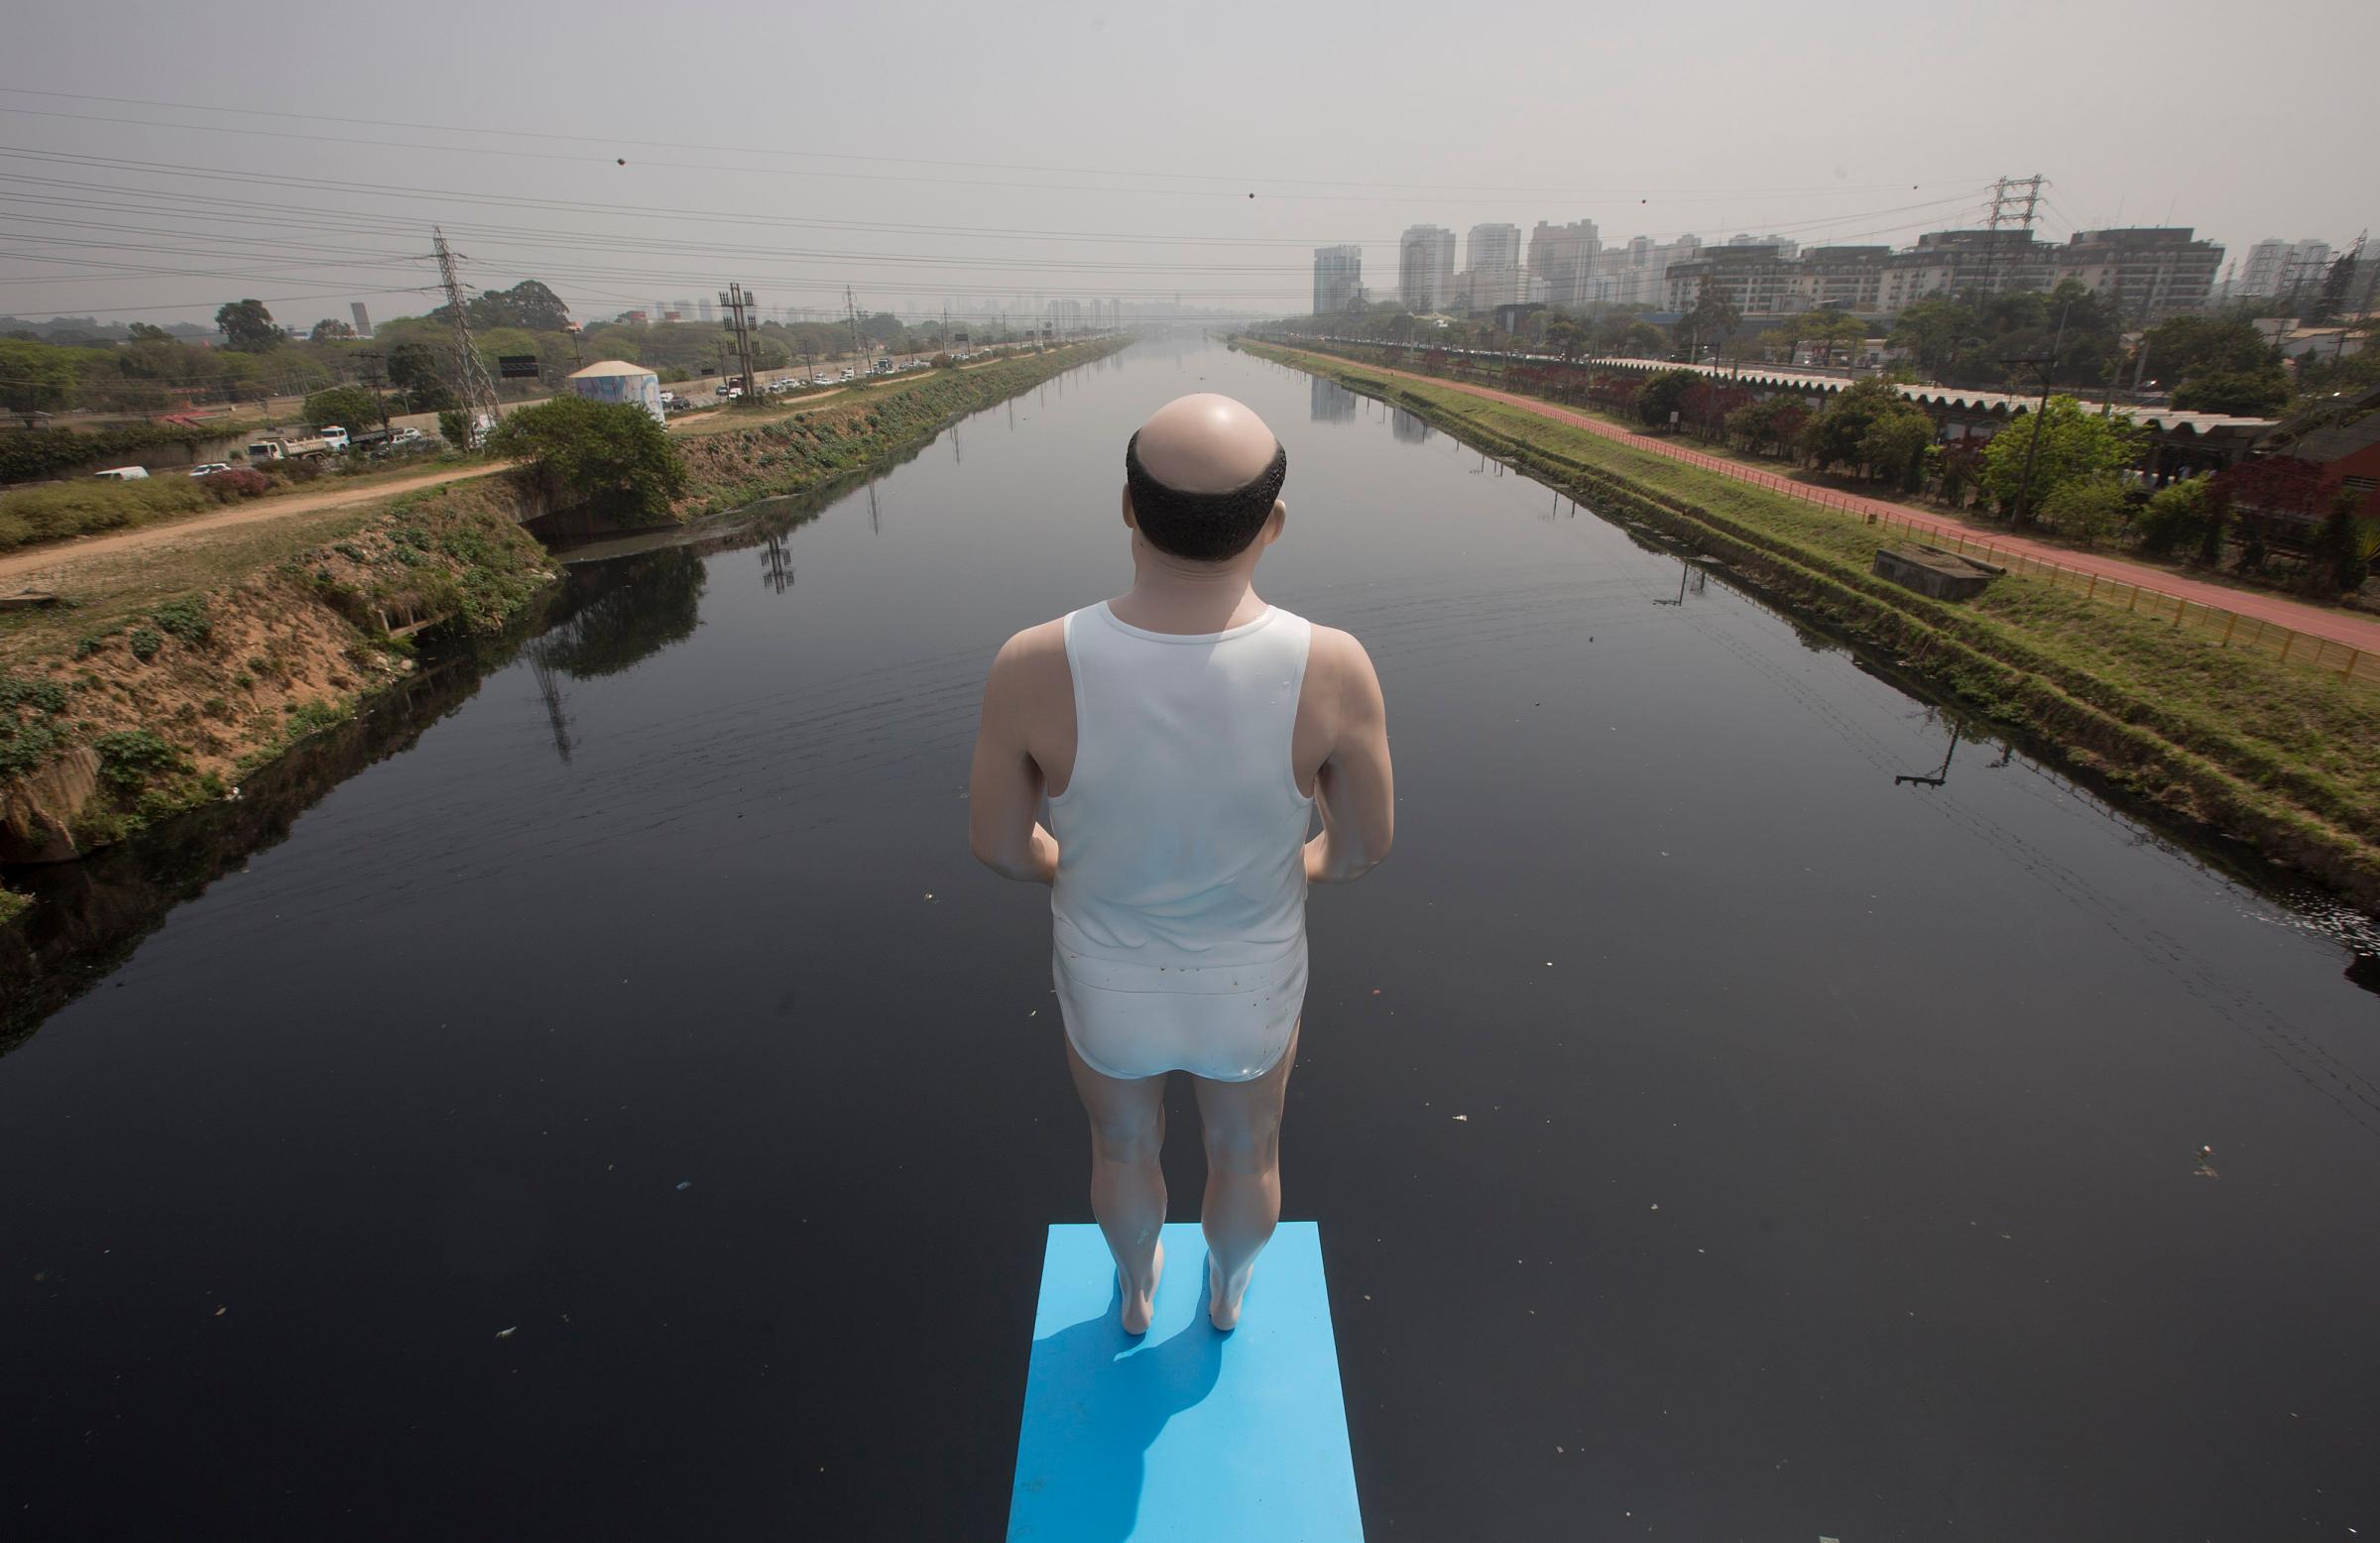 An art installation by Brazilian artist Eduardo Srur made with a life-size mannequin stands over the highly polluted Pinheiros River in Sao Paulo, Brazil on Sept. 18, 2014.